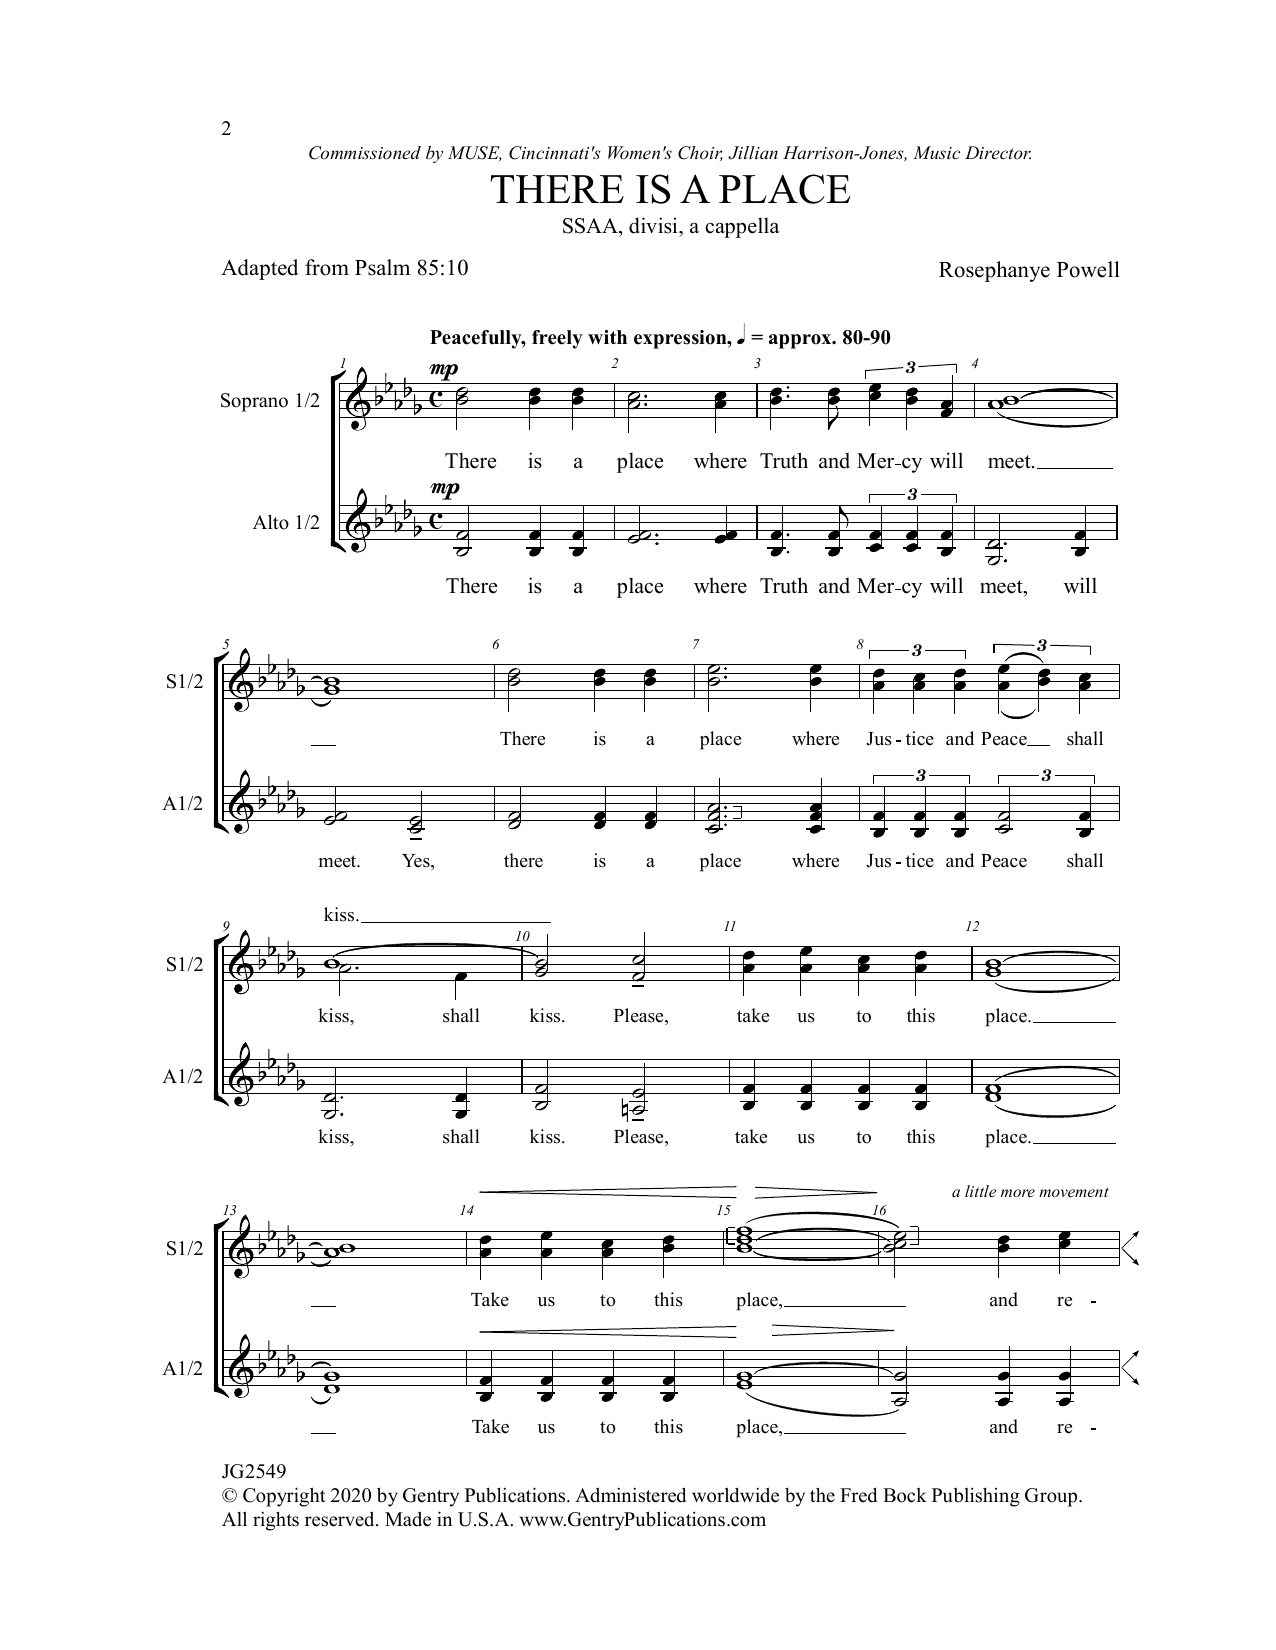 Download Rosephanye Powell There Is A Place Sheet Music